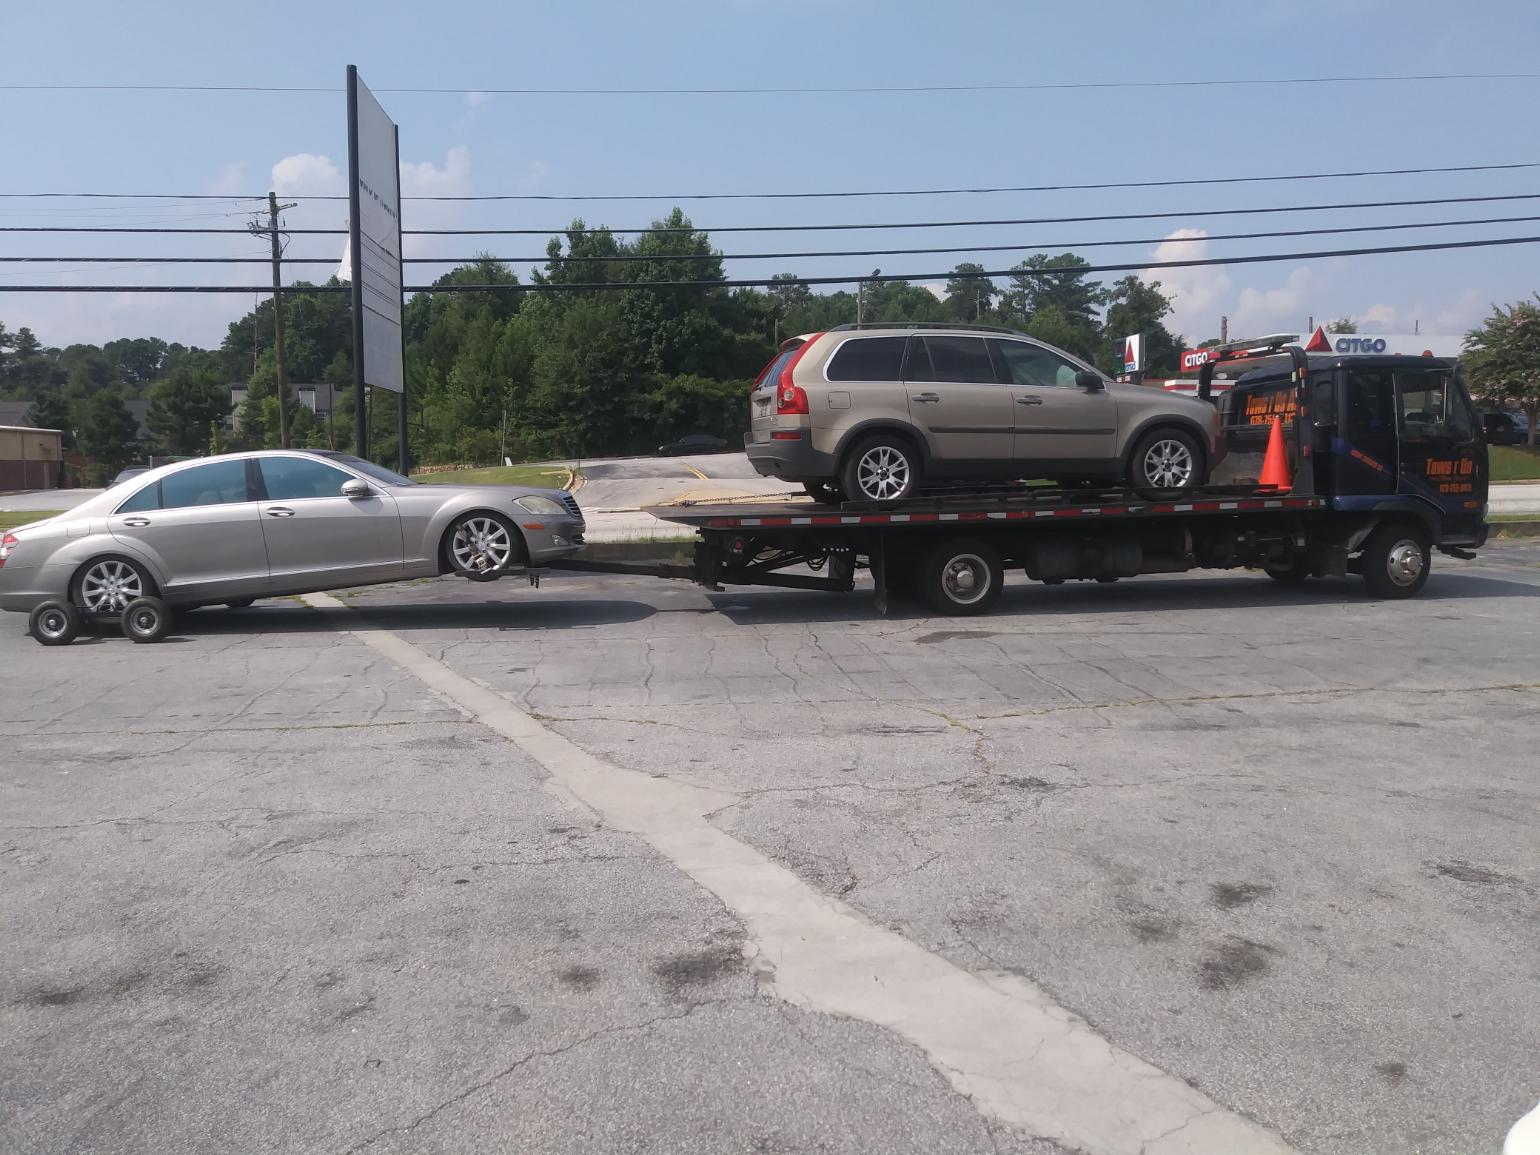 Tows-R-Us | (678) 755-8413 | Lithonia, GA | 24 Hour Towing Service | Light Duty Towing | Medium Duty Towing | Flatbed Towing | Box Truck Towing | School Bus Towing | Classic Car Towing | Dually Towing | Exotic Towing | Junk Car Removal | Limousine Towing | Winching & Extraction | Wrecker Towing | Luxury Car Towing | Accident Recovery | Equipment Transportation | Moving Forklifts | Scissor Lifts Movers | Boom Lifts Movers | Bull Dozers Movers | Excavators Movers | Compressors Movers | Wide Loads Transportation | Exotic Car & Sport Car Towing | Long Distance Towing | Auto Transport | Tipsy Towing | Lockouts | Fuel Delivery | Jump Starts | Roadside Assistance | Motorcycle Towing | Tire Service | Private Property Impound (Non-Consensual Towing)